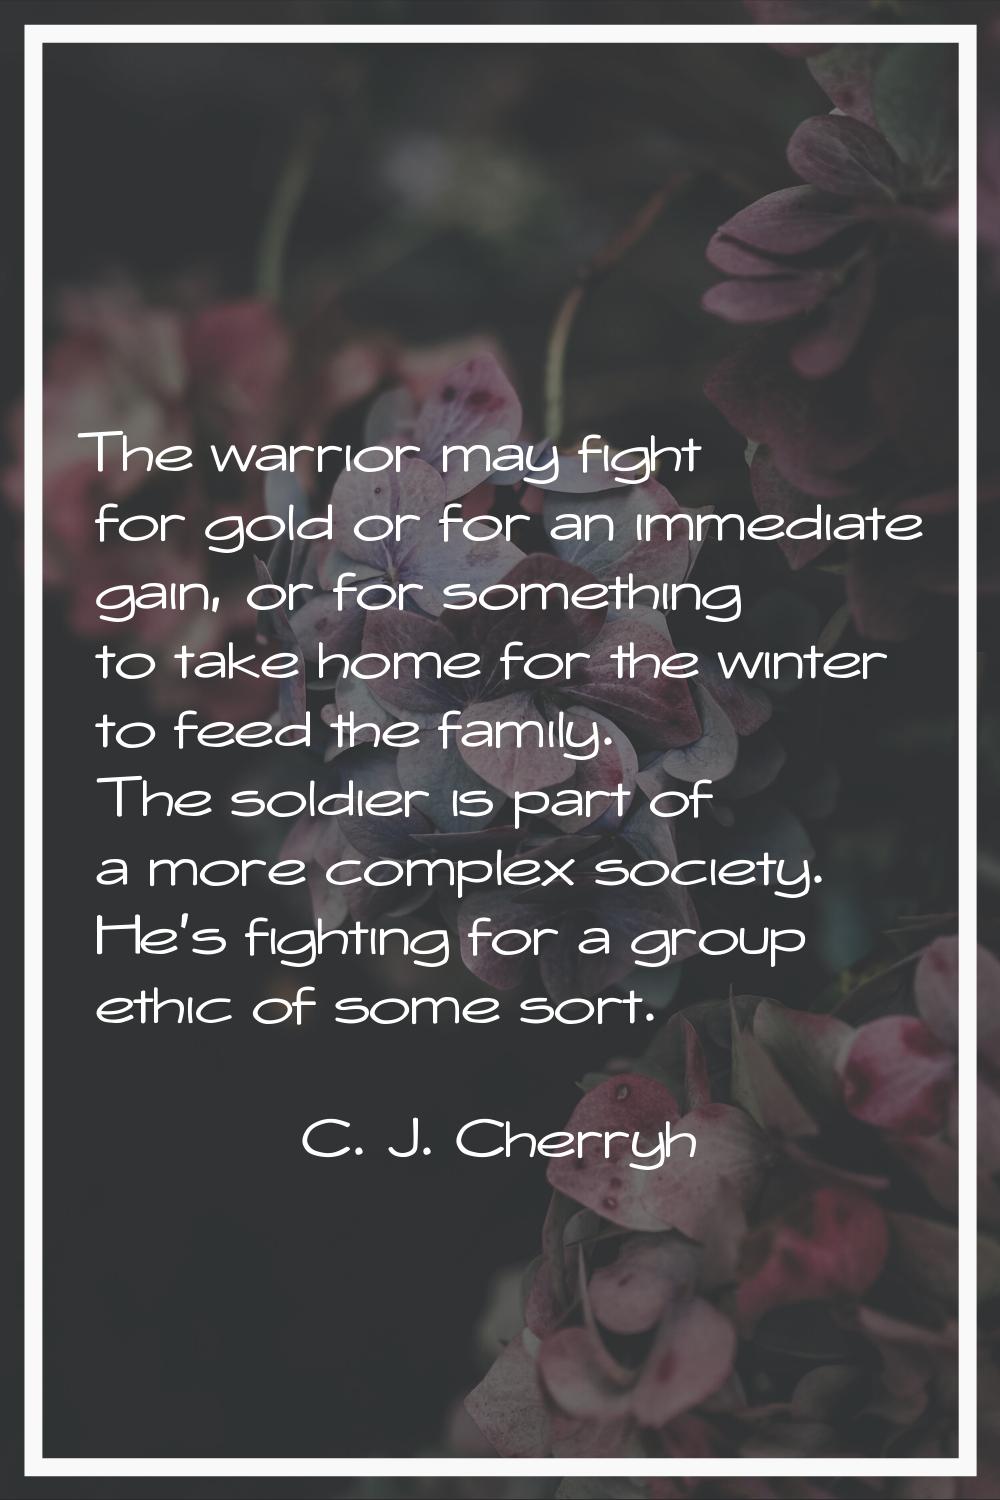 The warrior may fight for gold or for an immediate gain, or for something to take home for the wint